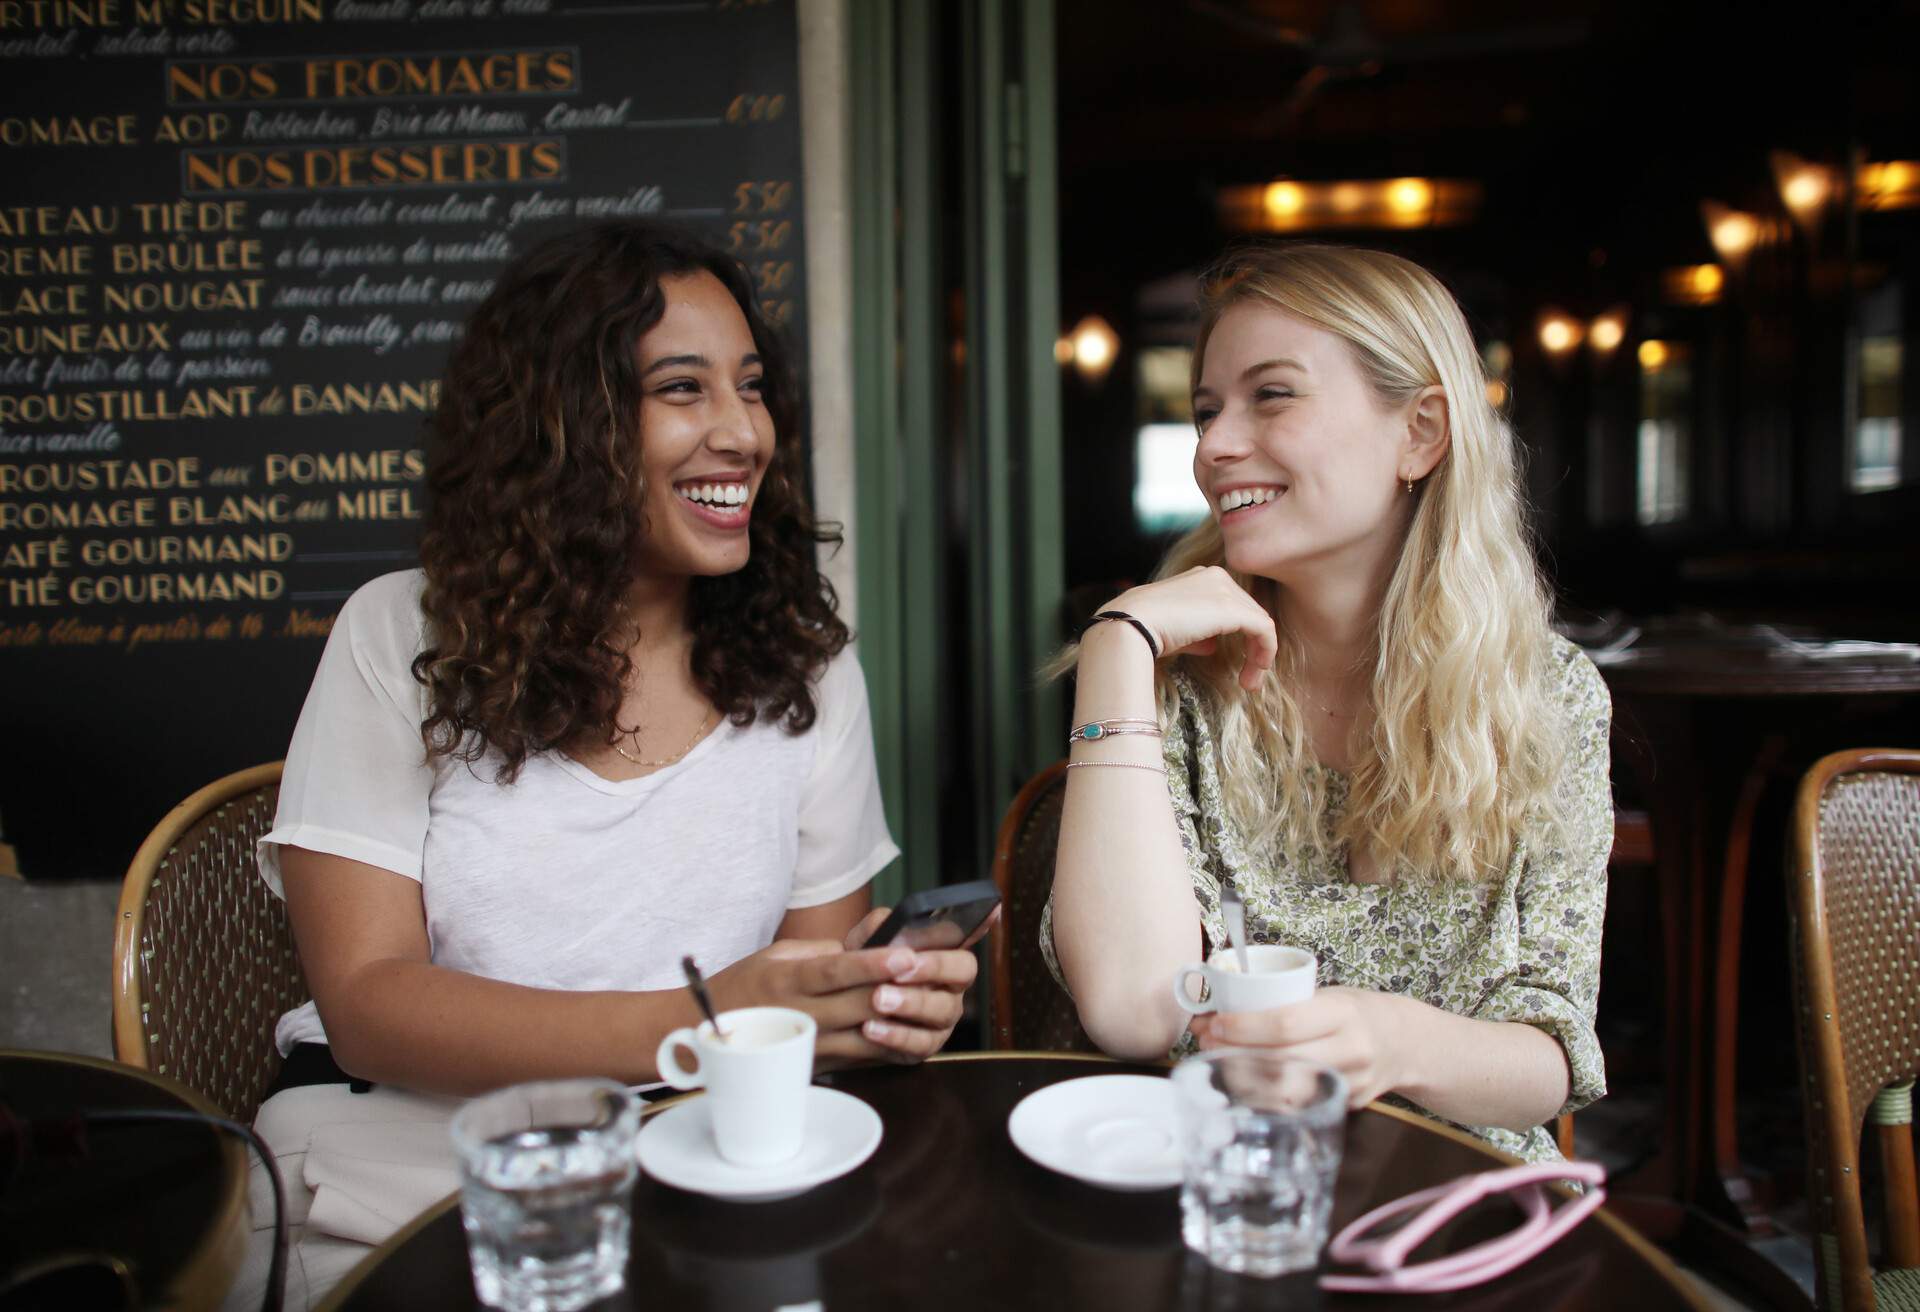 Two female friends smiling at each other in a café in Paris, France